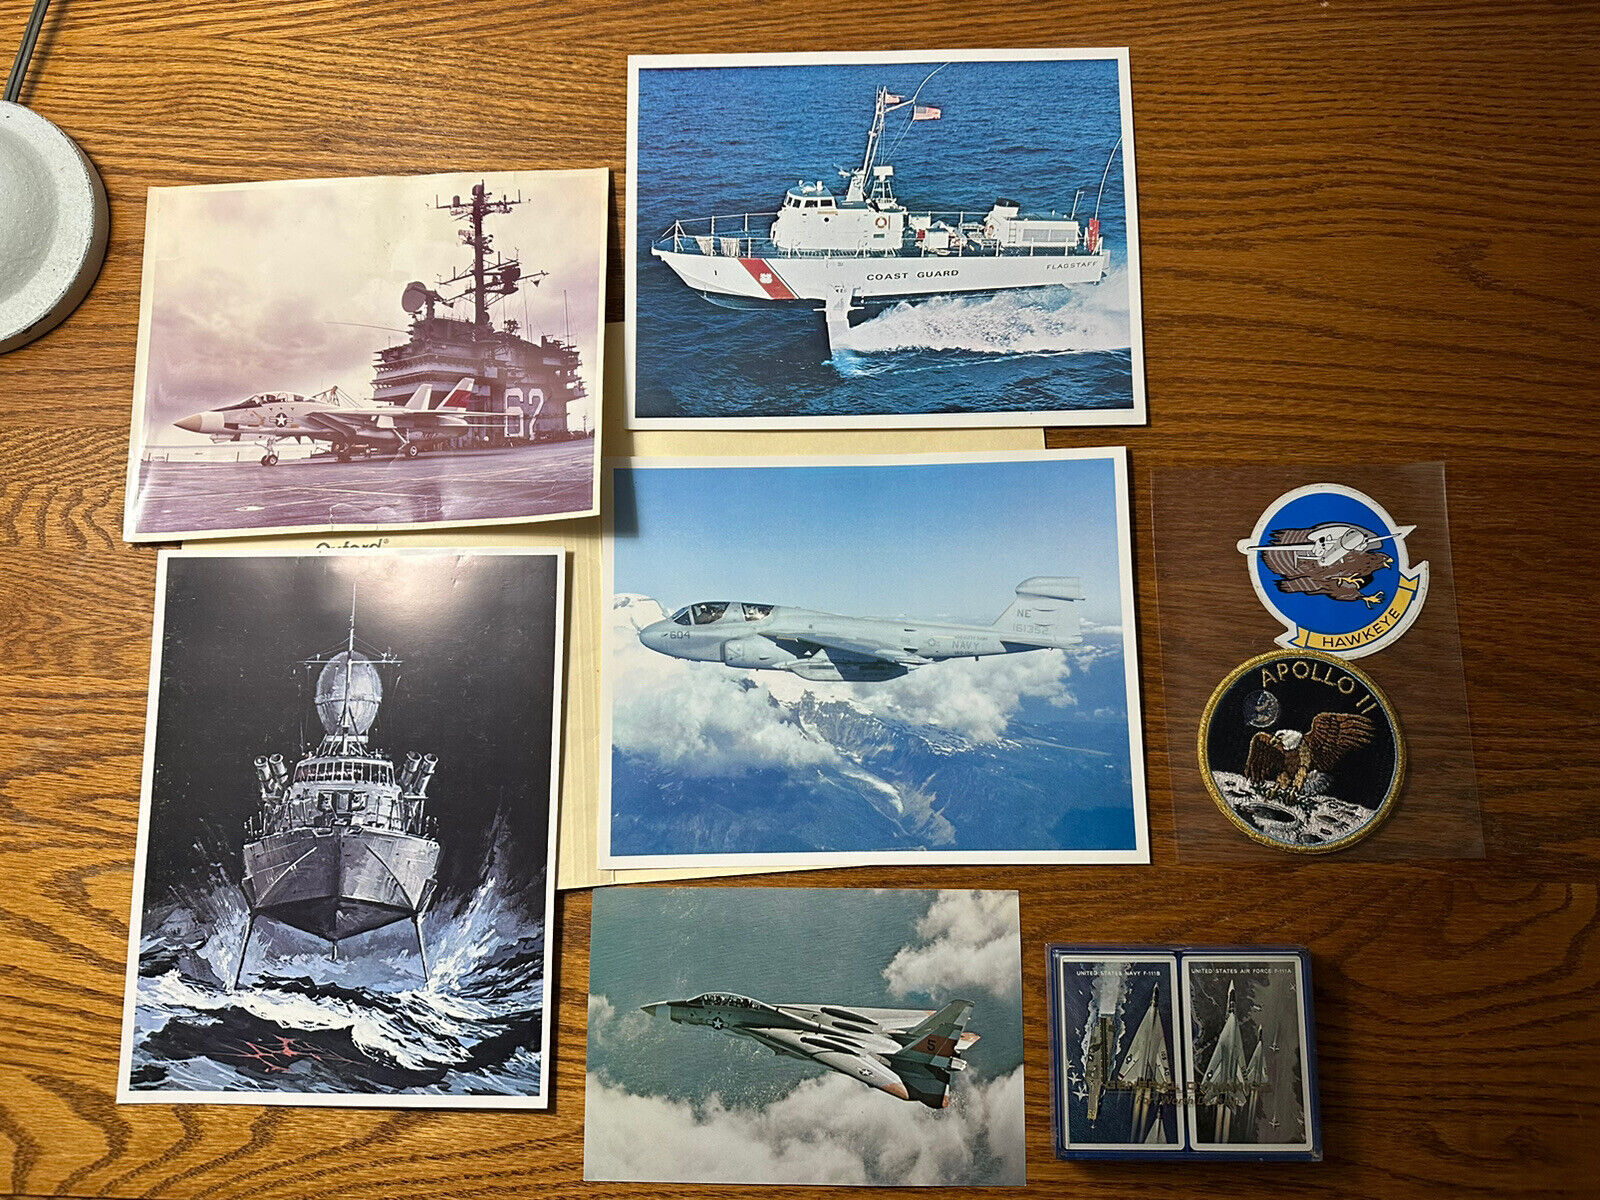 Grumman Aerospace Corporation • Collectibles: Pictures, Cards, Sticker, Patch